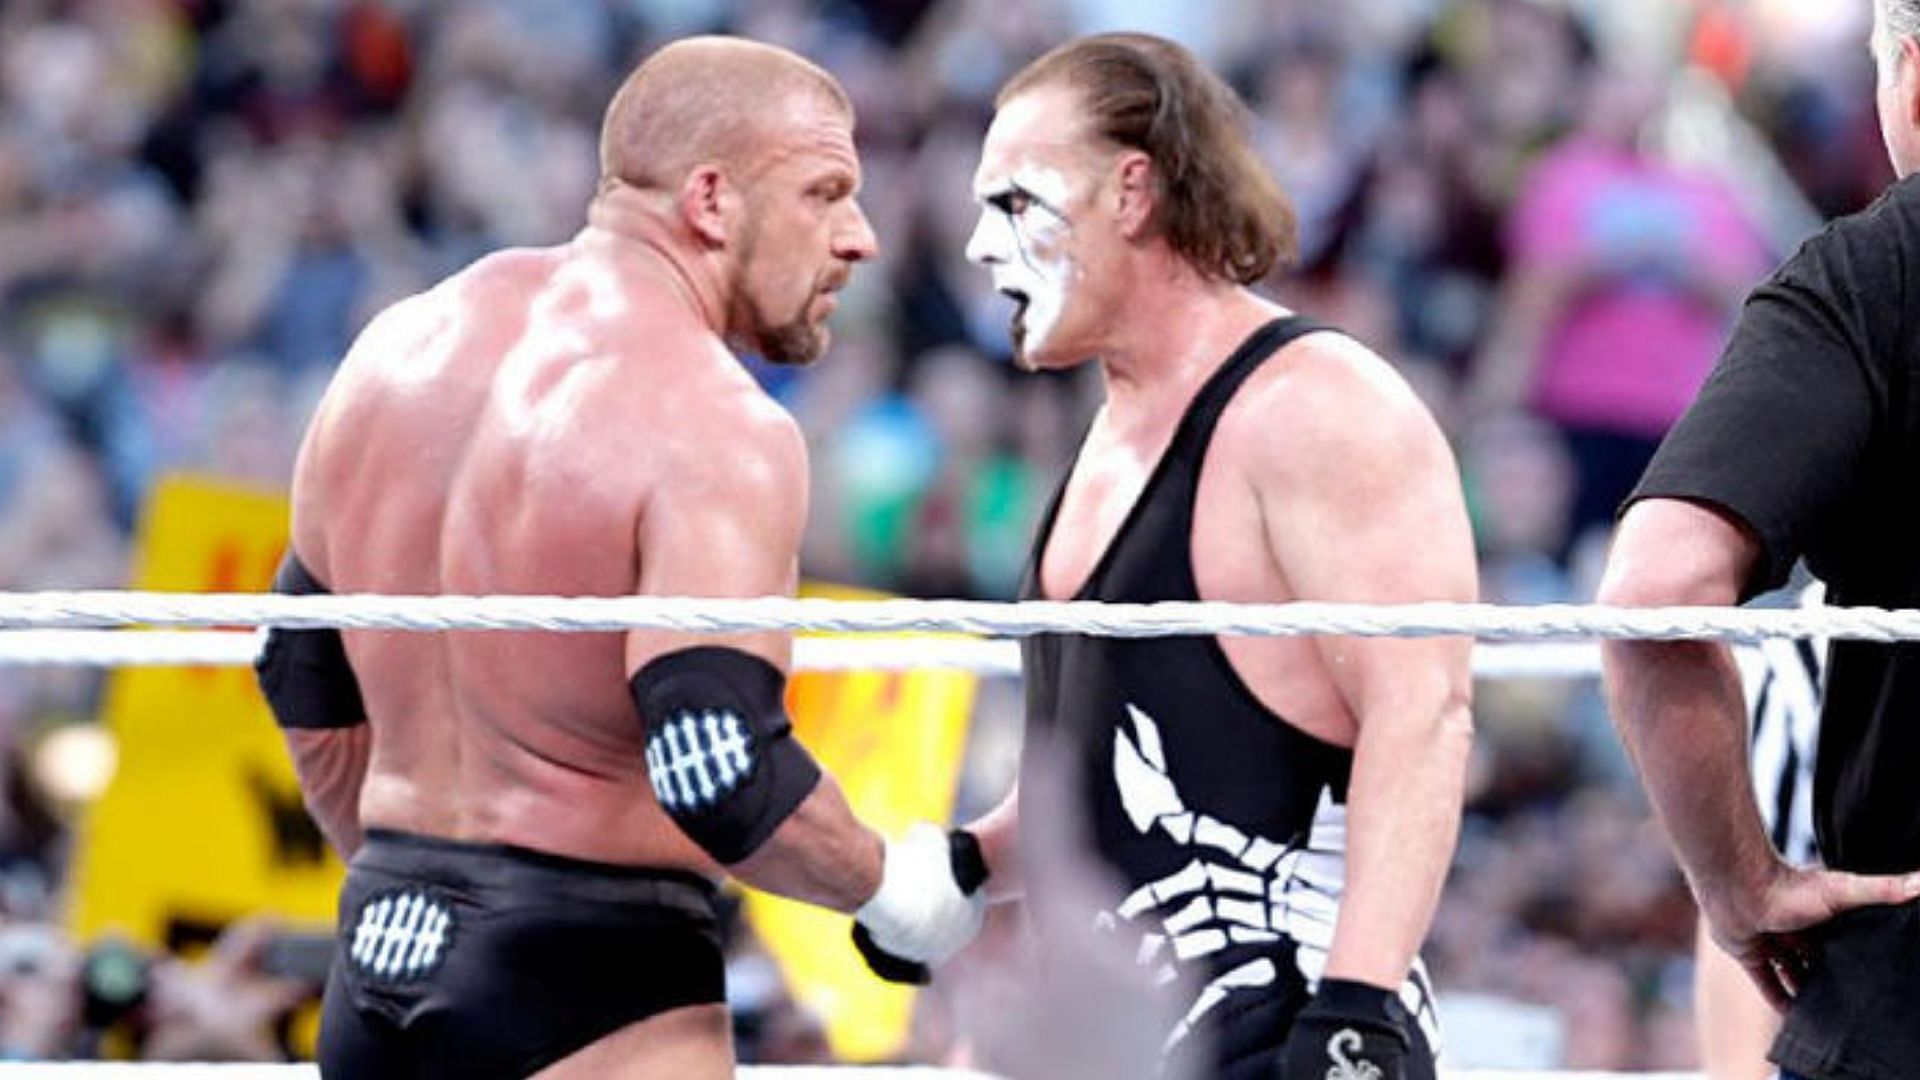 Triple H (left) and Sting (right) at WrestleMania 31